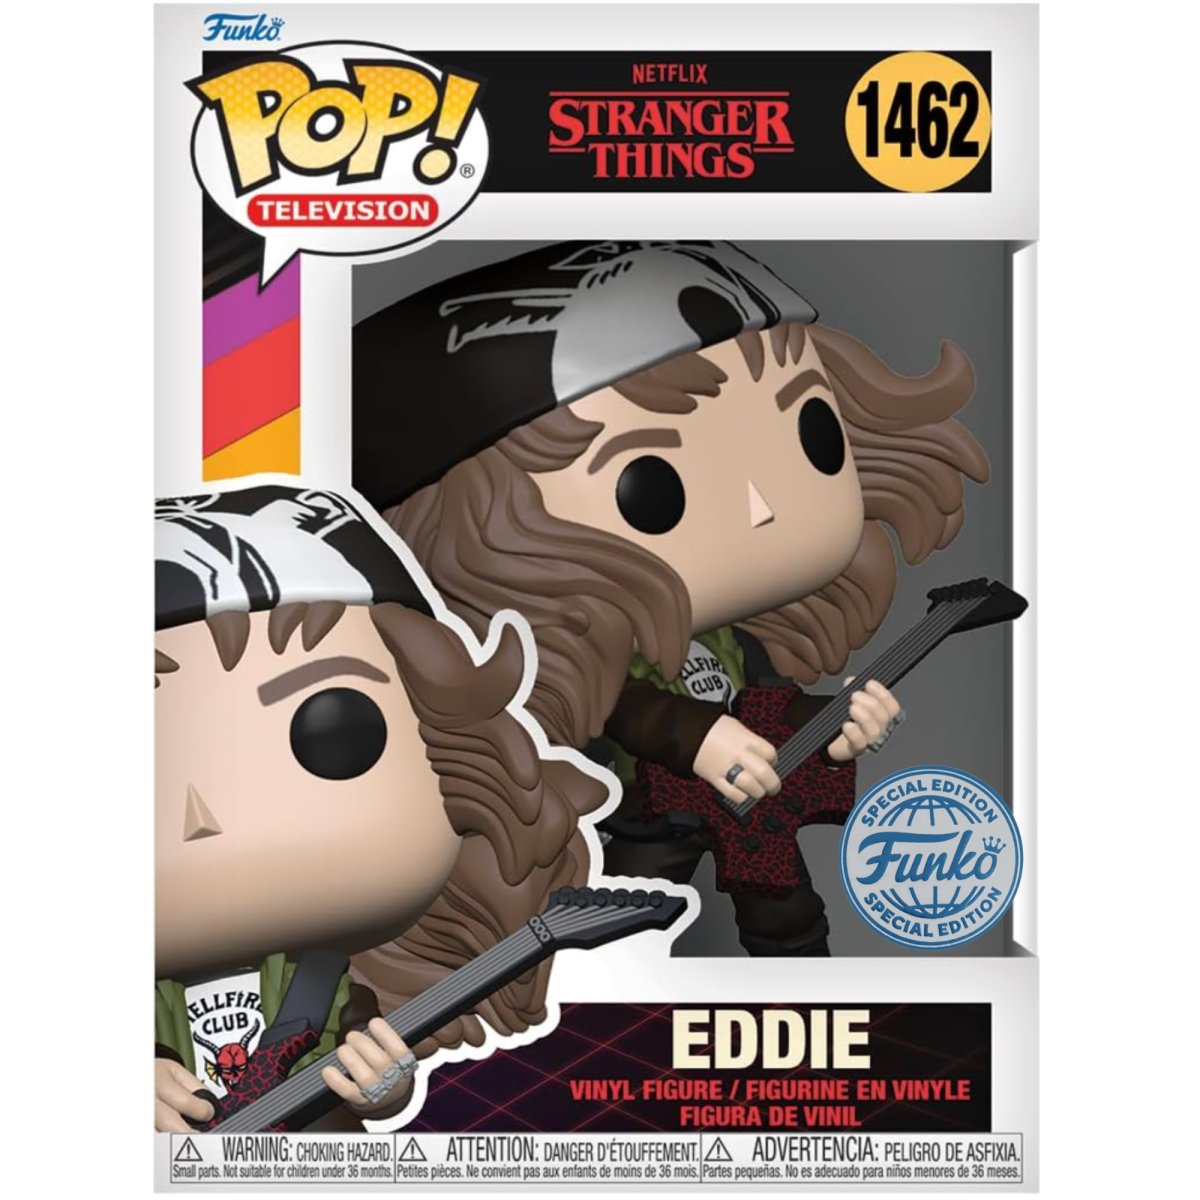 Stranger Things - Eddie [with Guitar] (Metallic Special Edition) #1462 - Funko Pop! Vinyl Television - Persona Toys